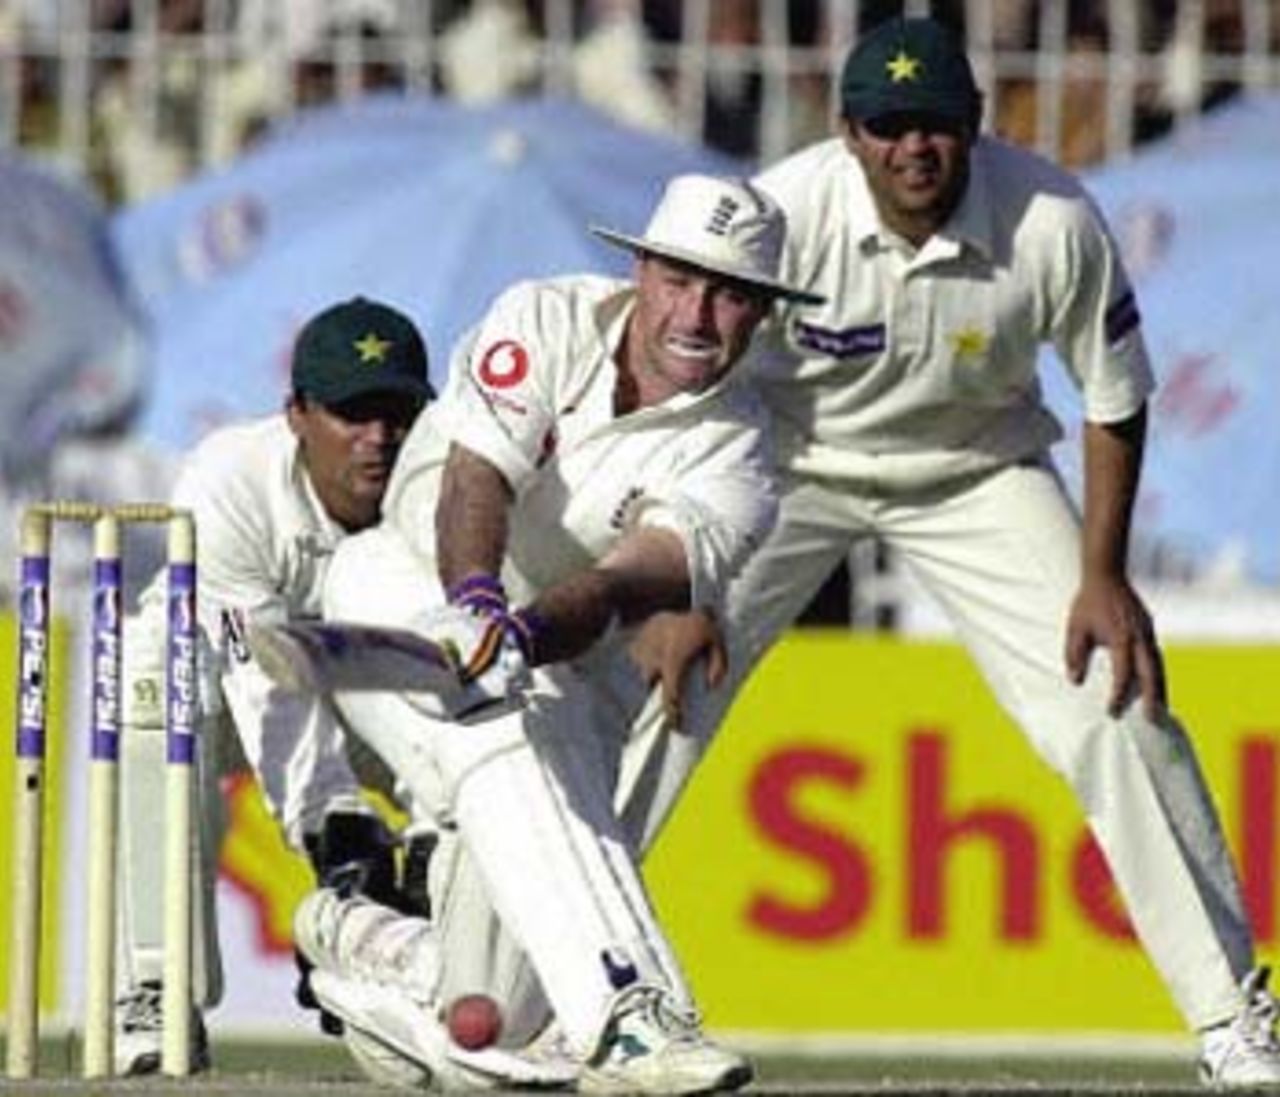 Graham Thorpe sweeps the spinners as Moin Khan and Inzamam ul-Haq watch, England in Pakistan, 2000/01, 2nd Test, Pakistan v England, Iqbal Stadium, Faisalabad, 29Nov-03Dec 2000 (Day 3).